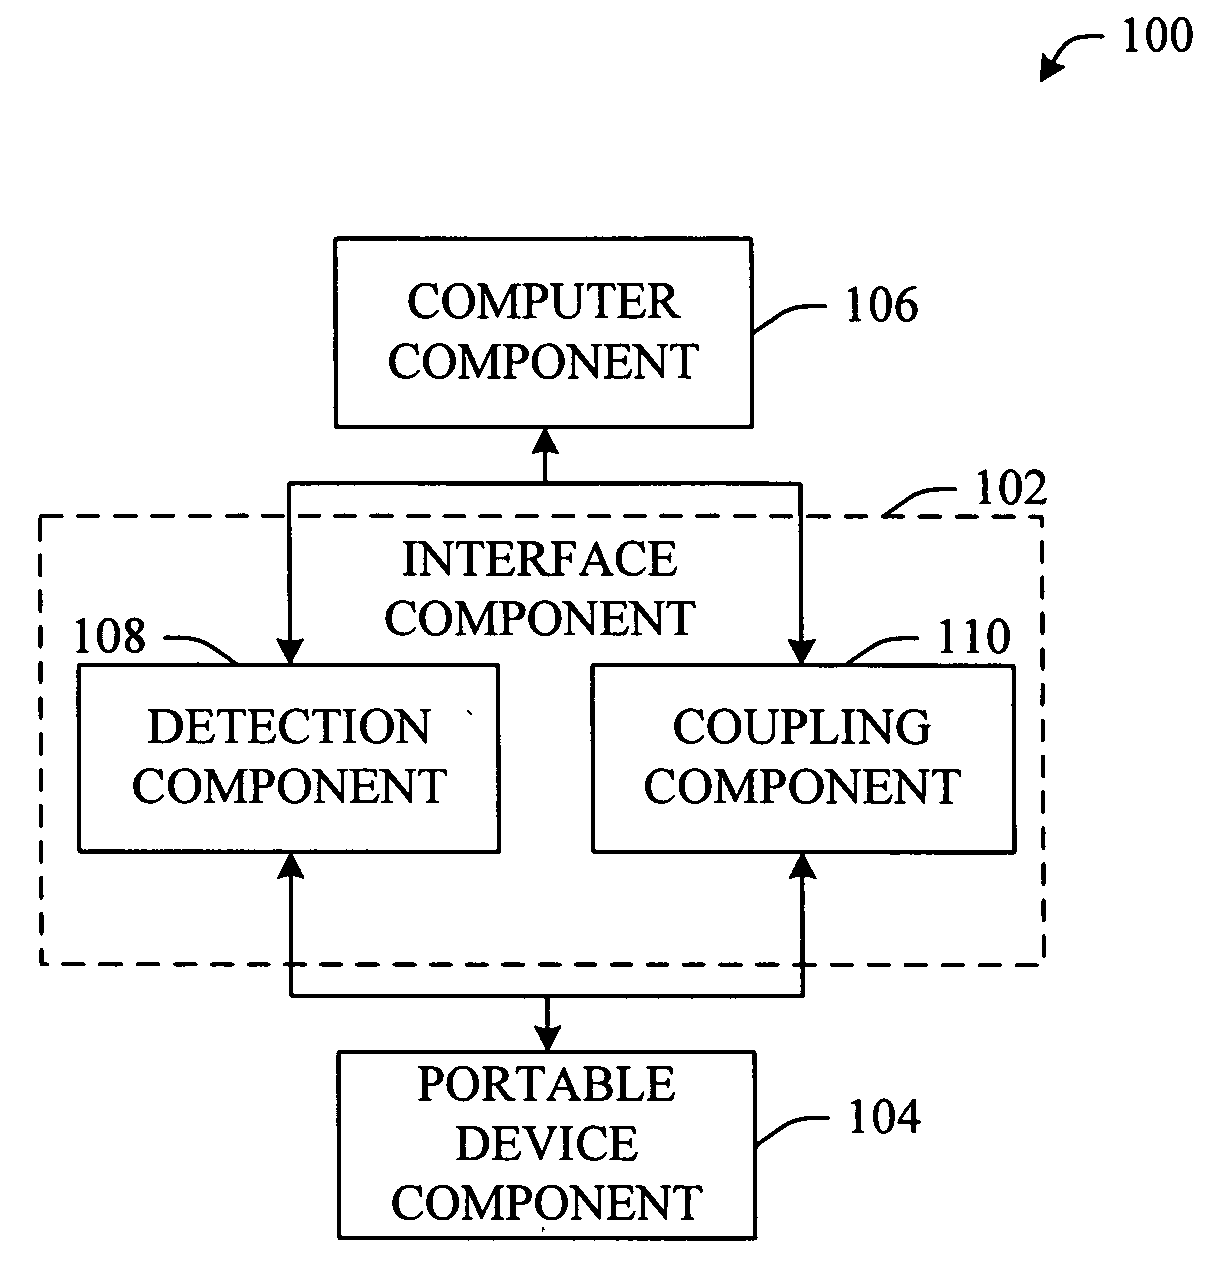 Seamless integration of portable computing devices and desktop computers